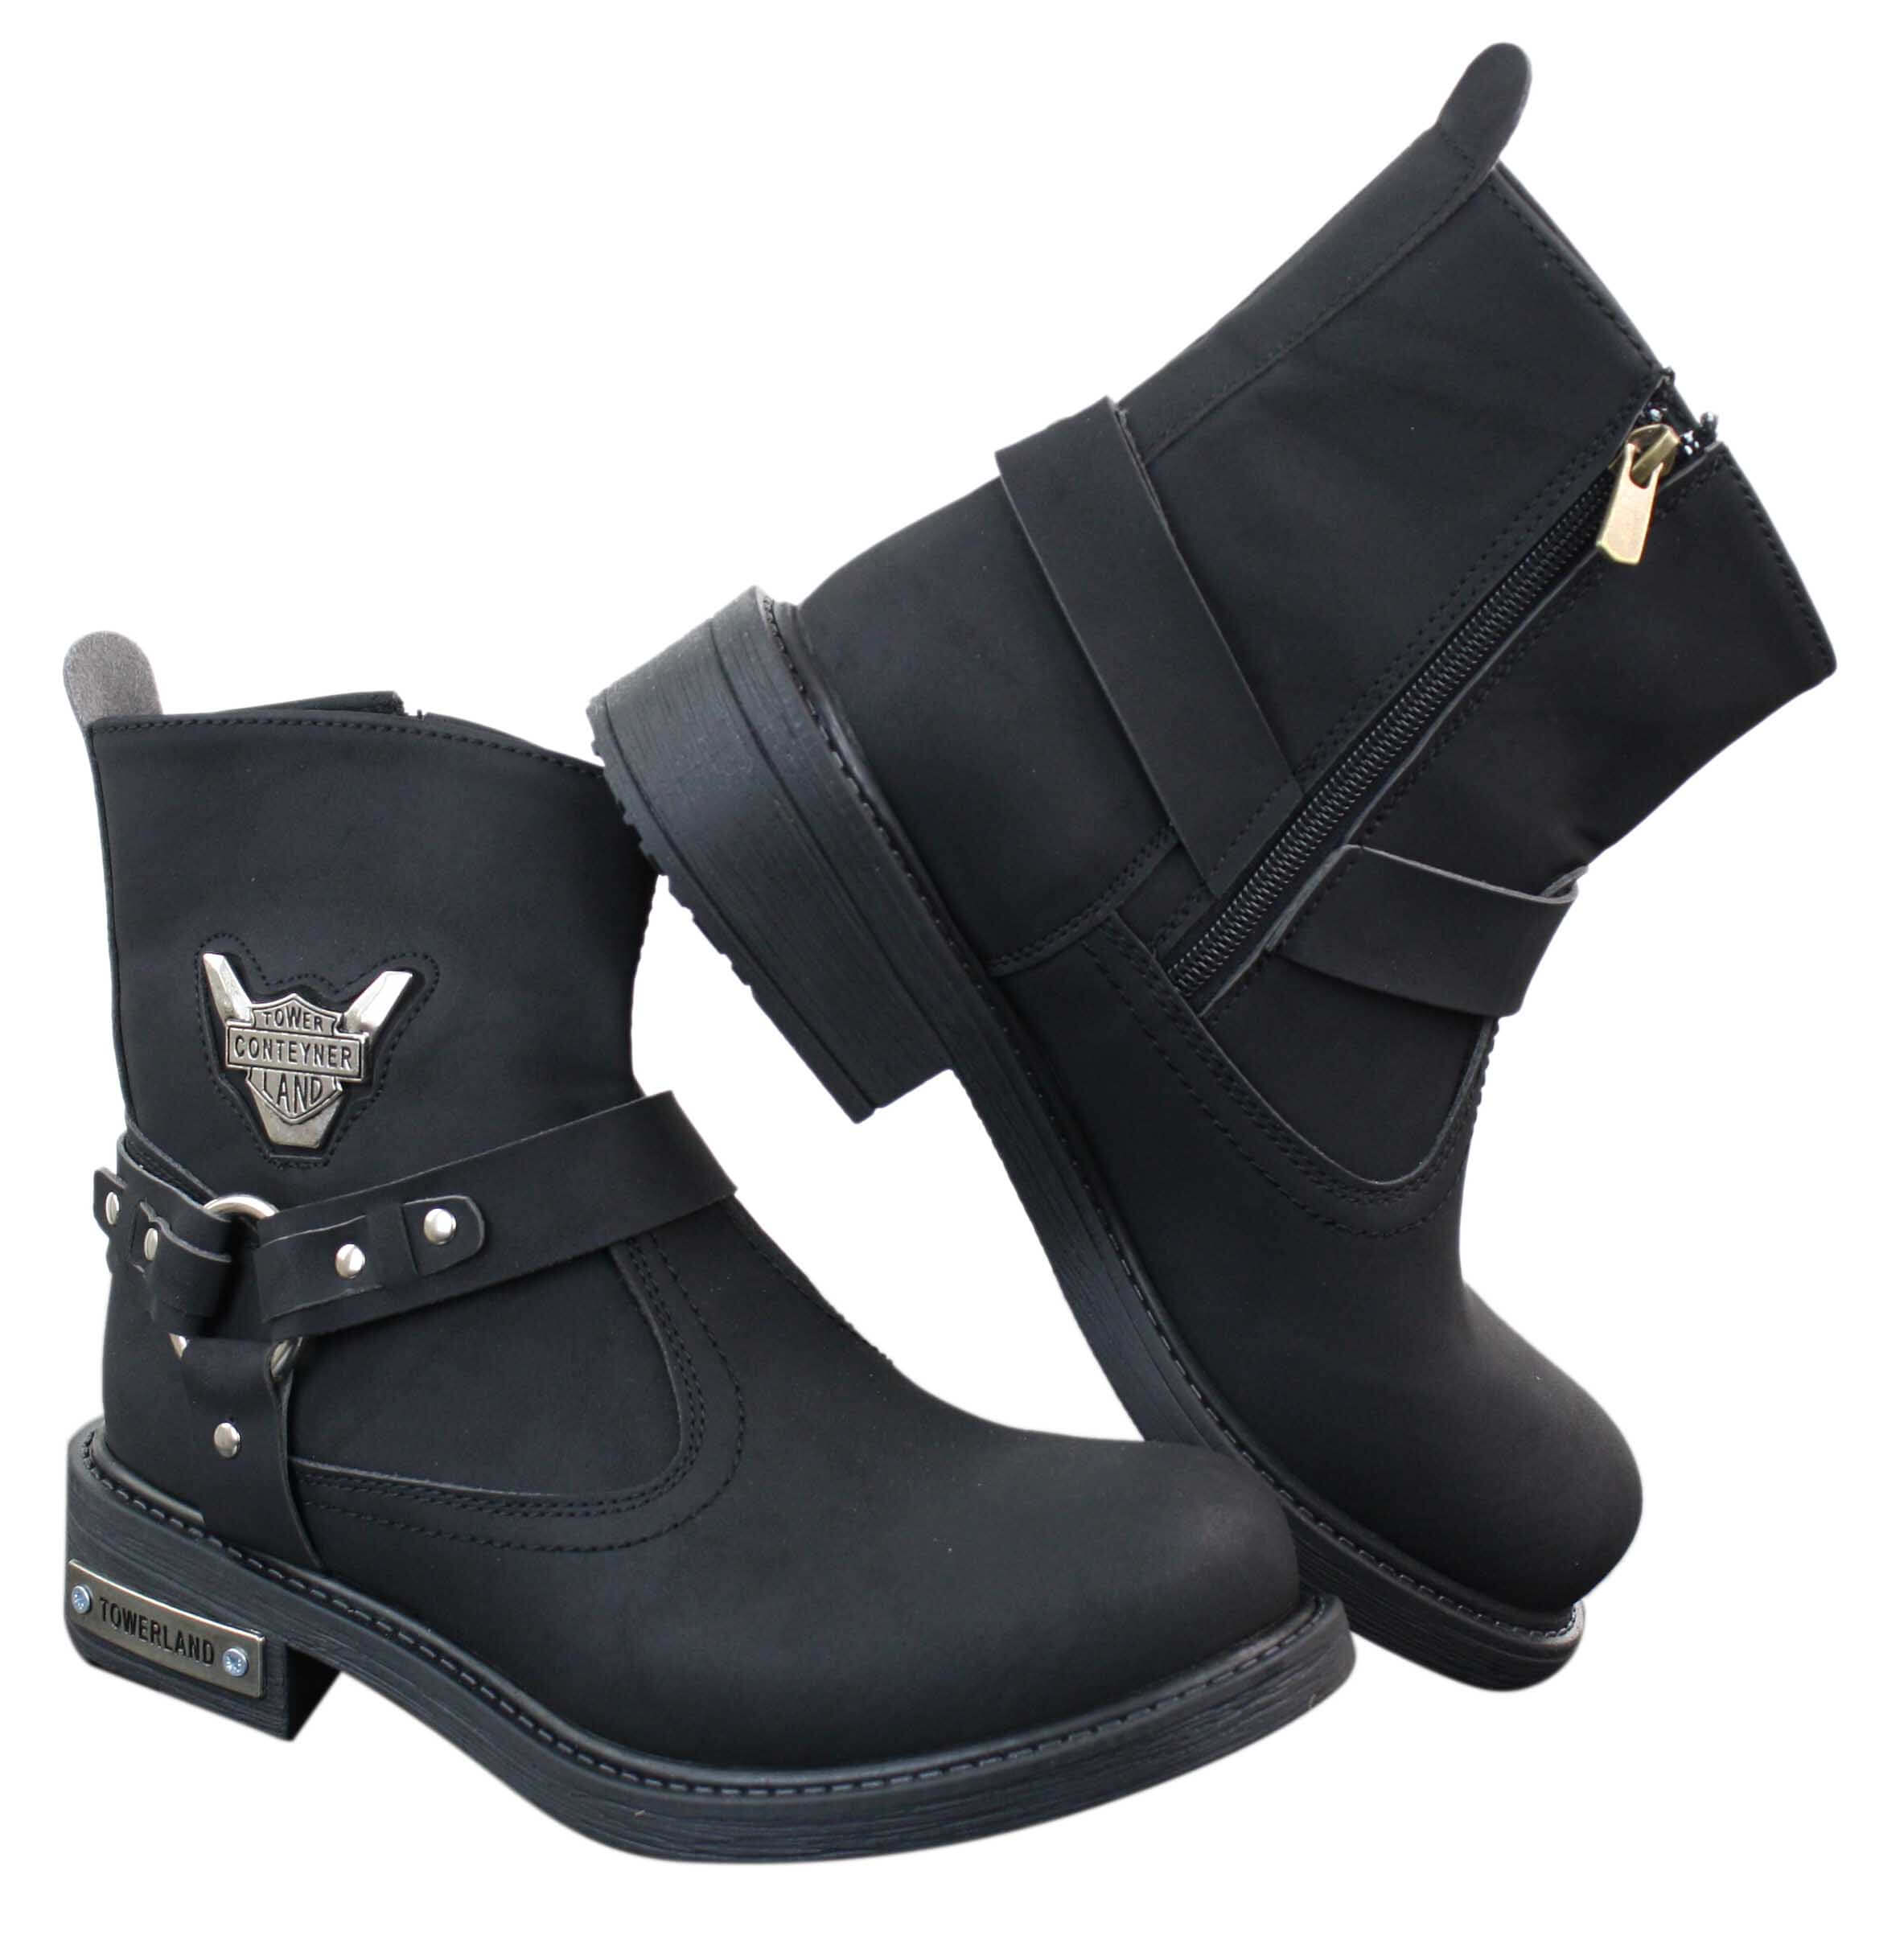 Mens Cowboy Motorcycle Riding Boots Nubuck PU Leather: Buy Online